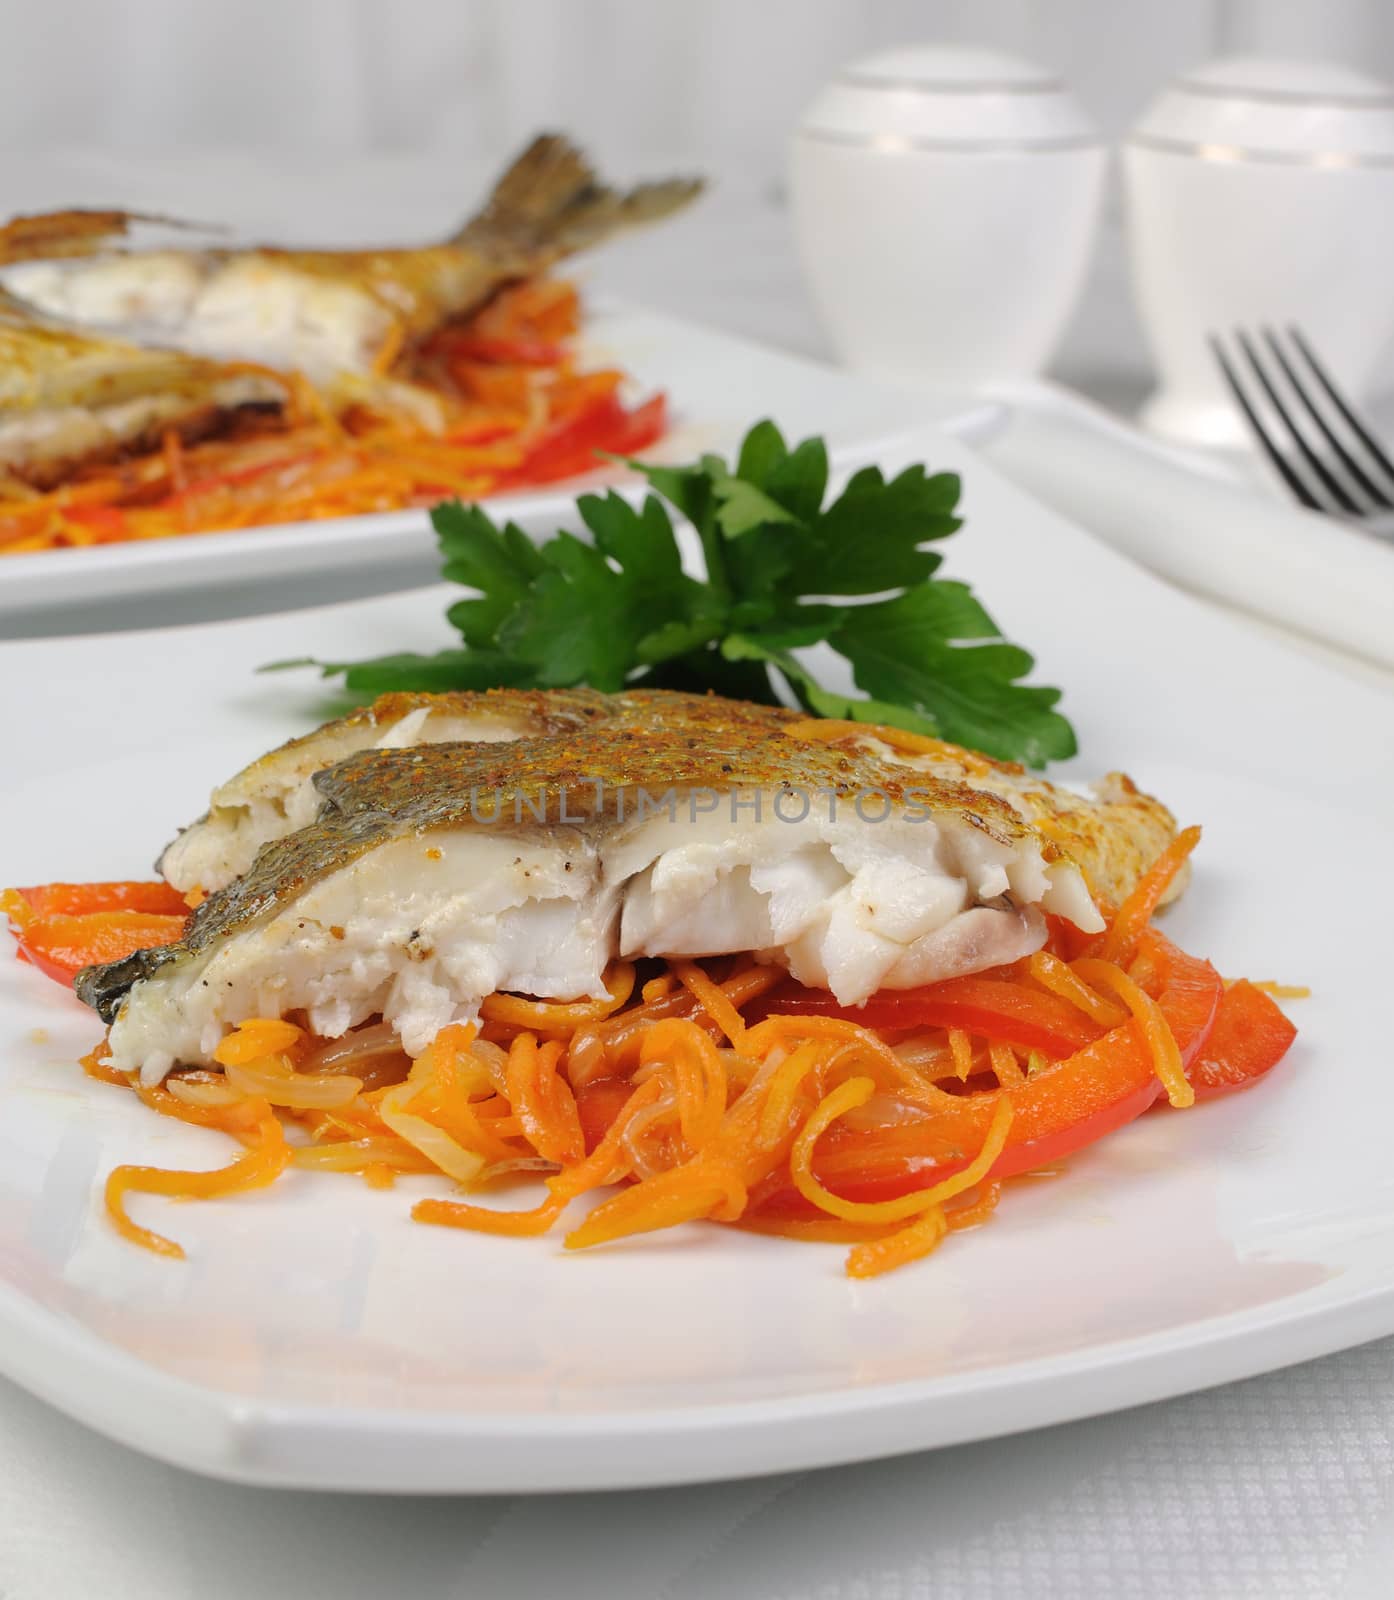 Slices of grilled fish (Dorado) by Apolonia